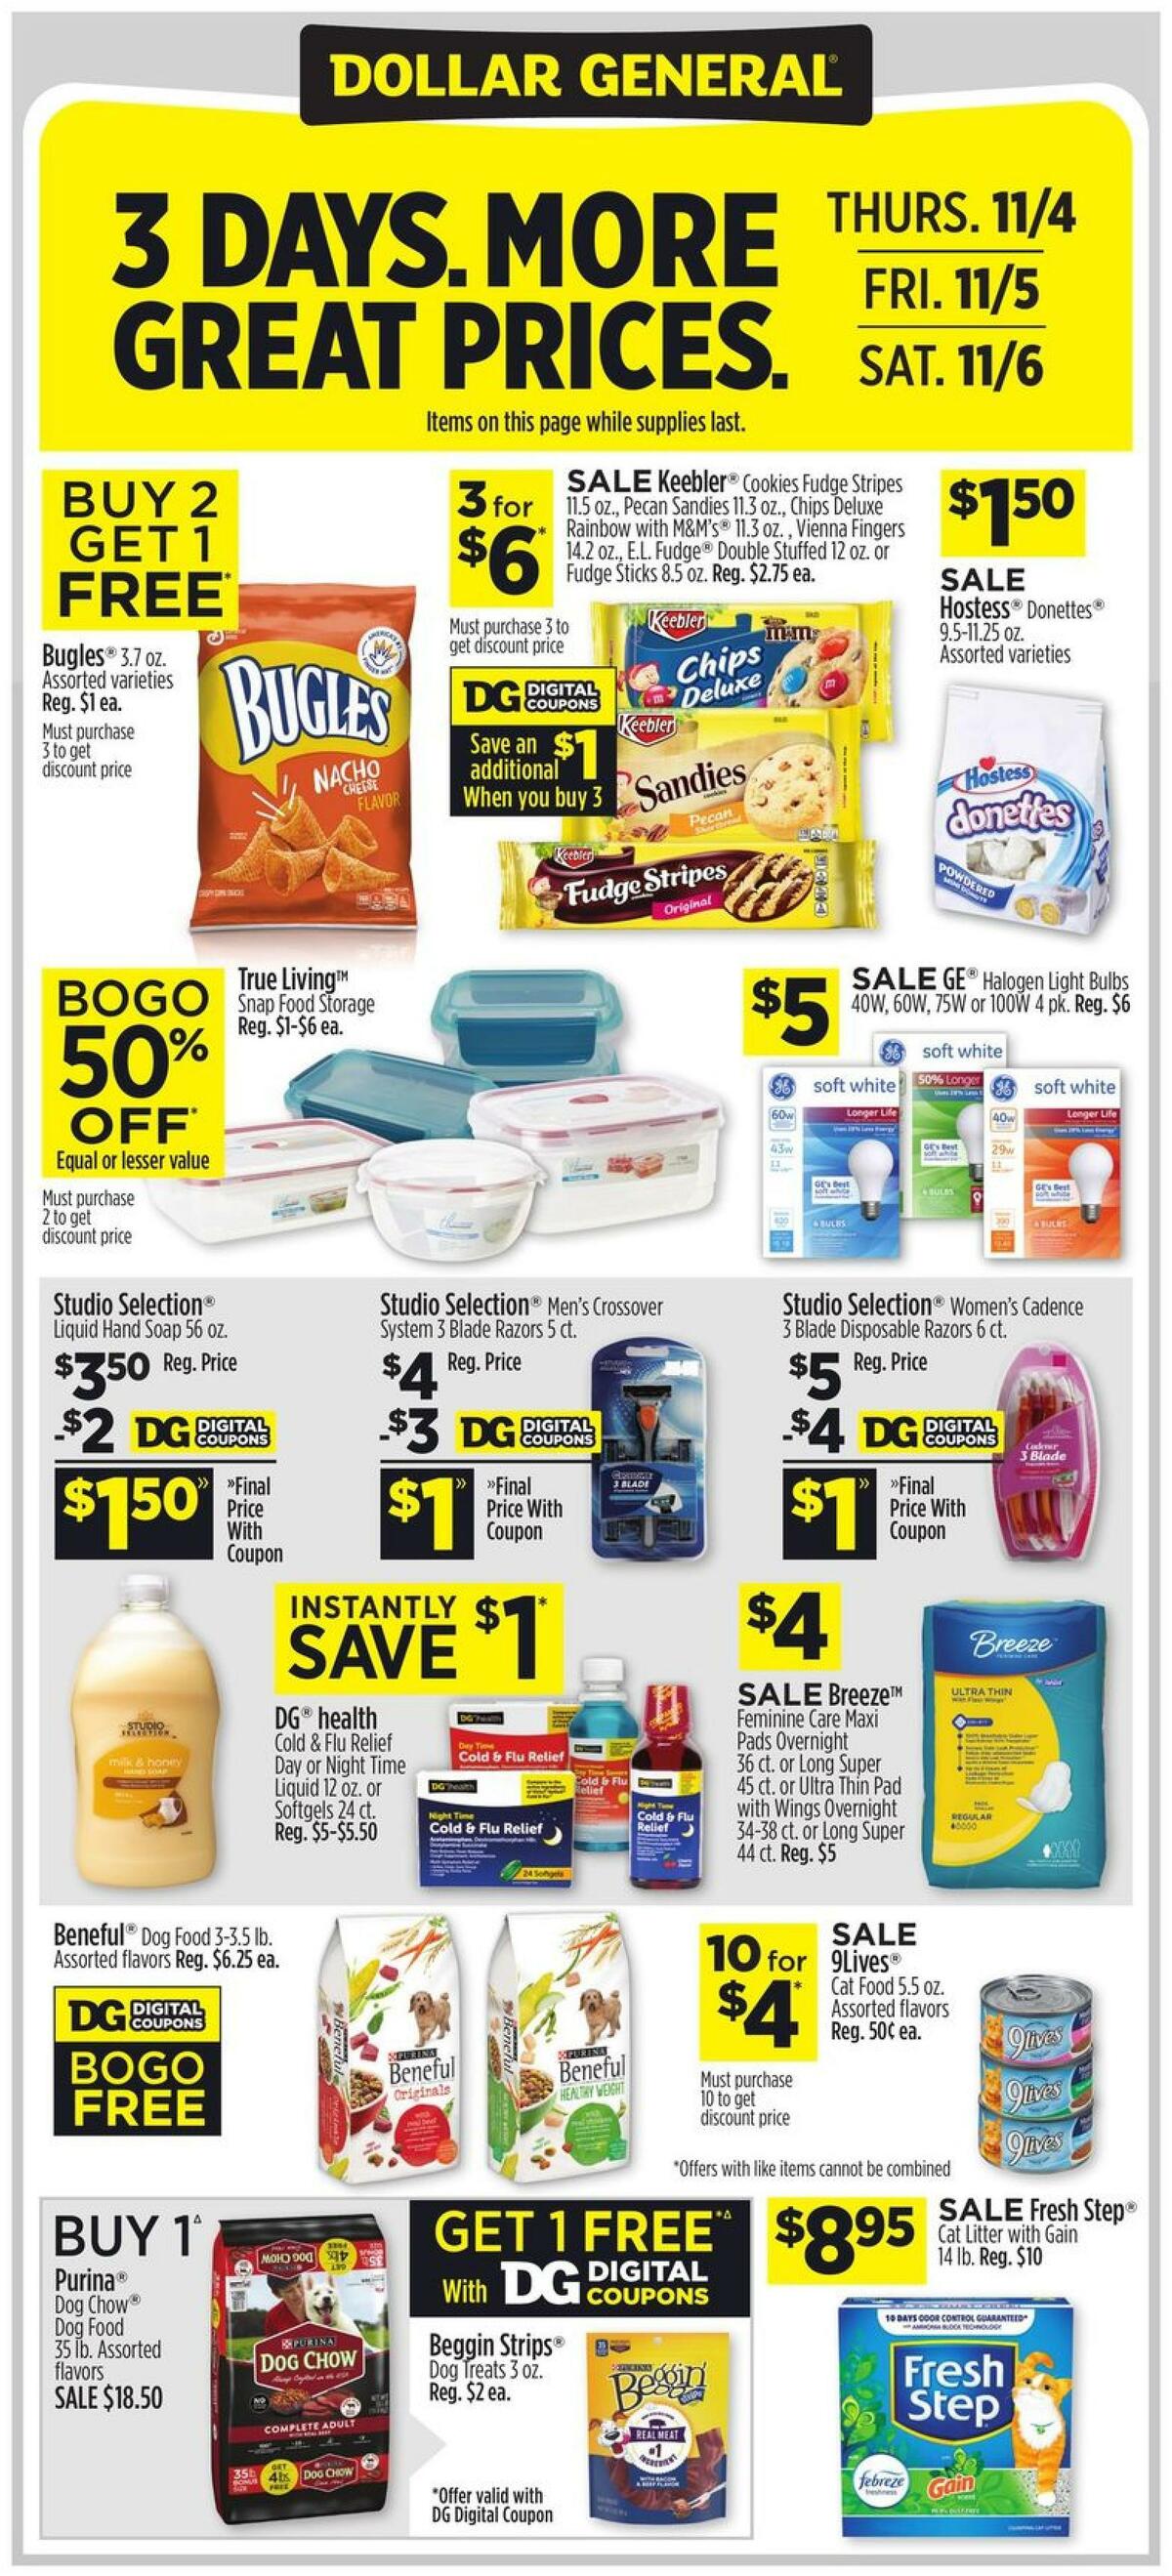 Dollar General Weekly Ad from October 31